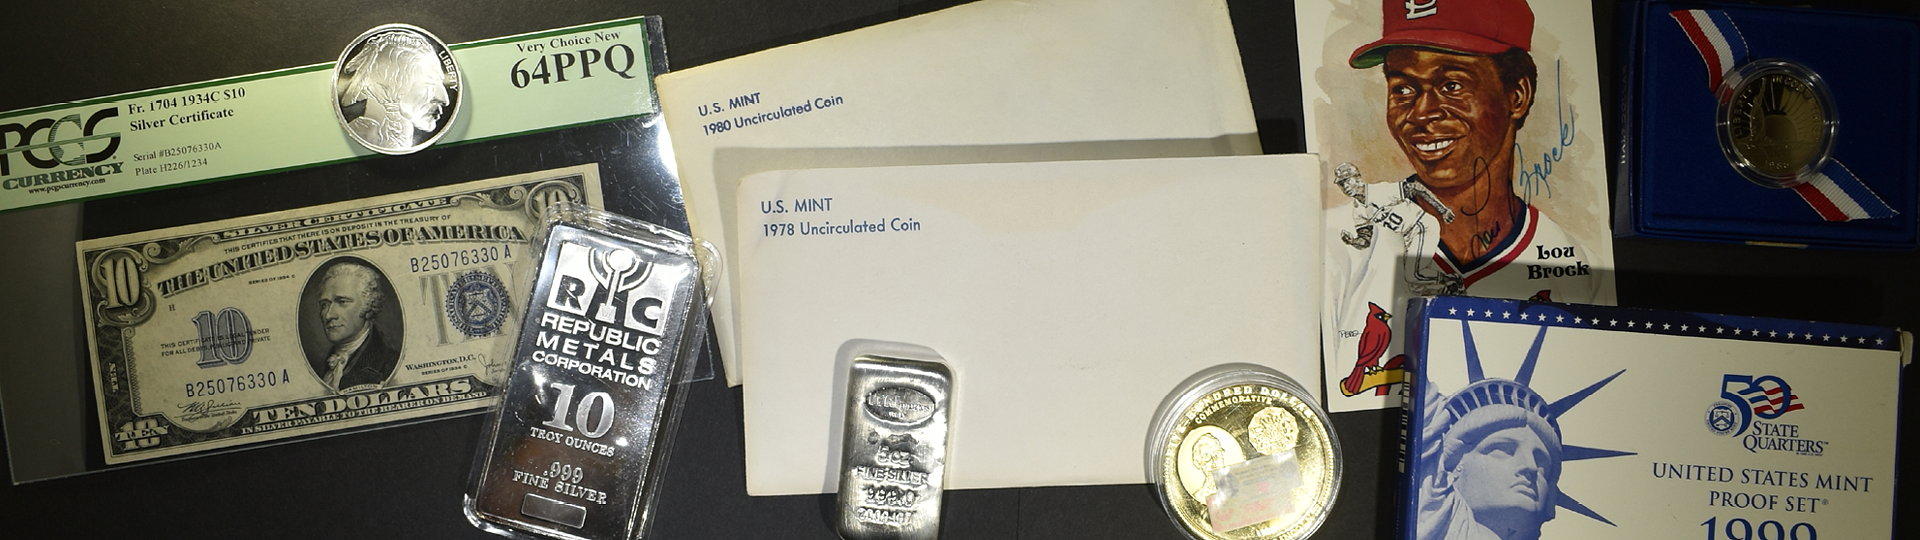 March 7th Silver City Rare Coins & Currency by Silver City Auctions